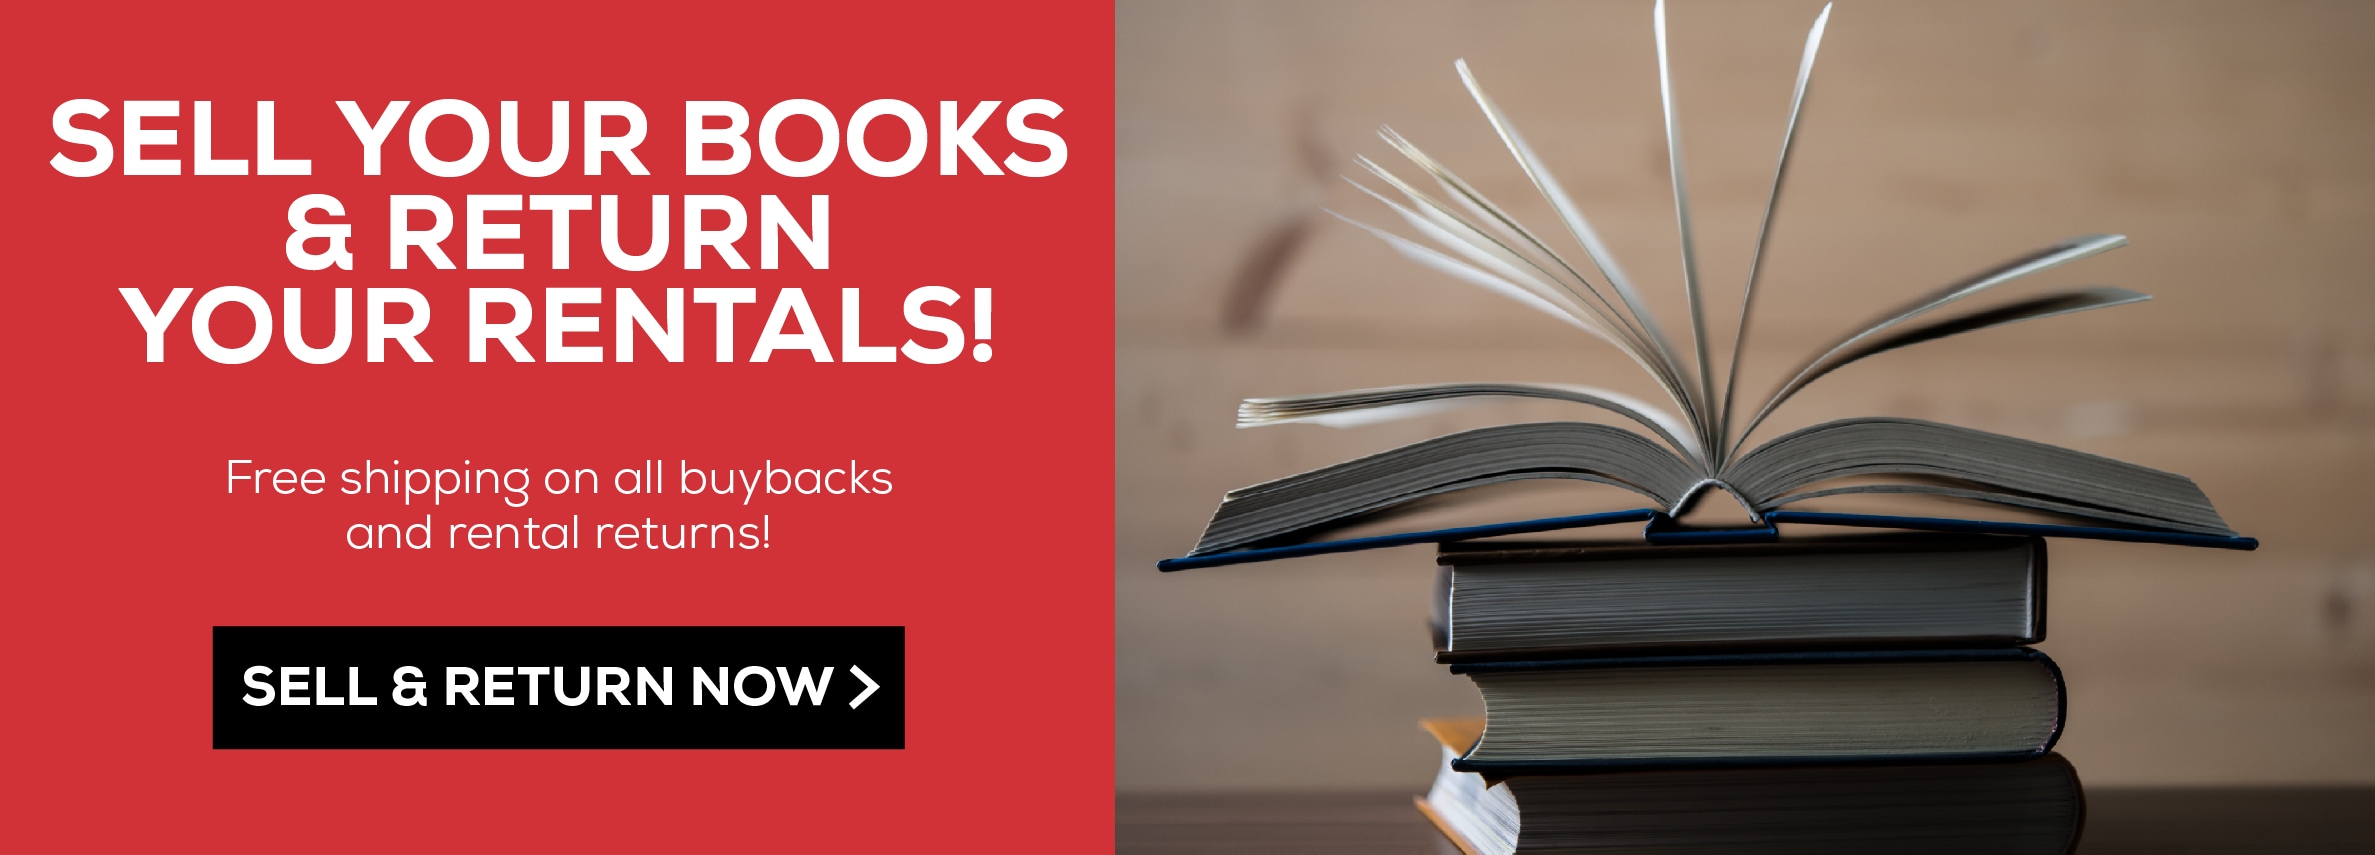 Sell your books and return your rentals! Free shipping on all buybacks and rental returns! Sell and return now.